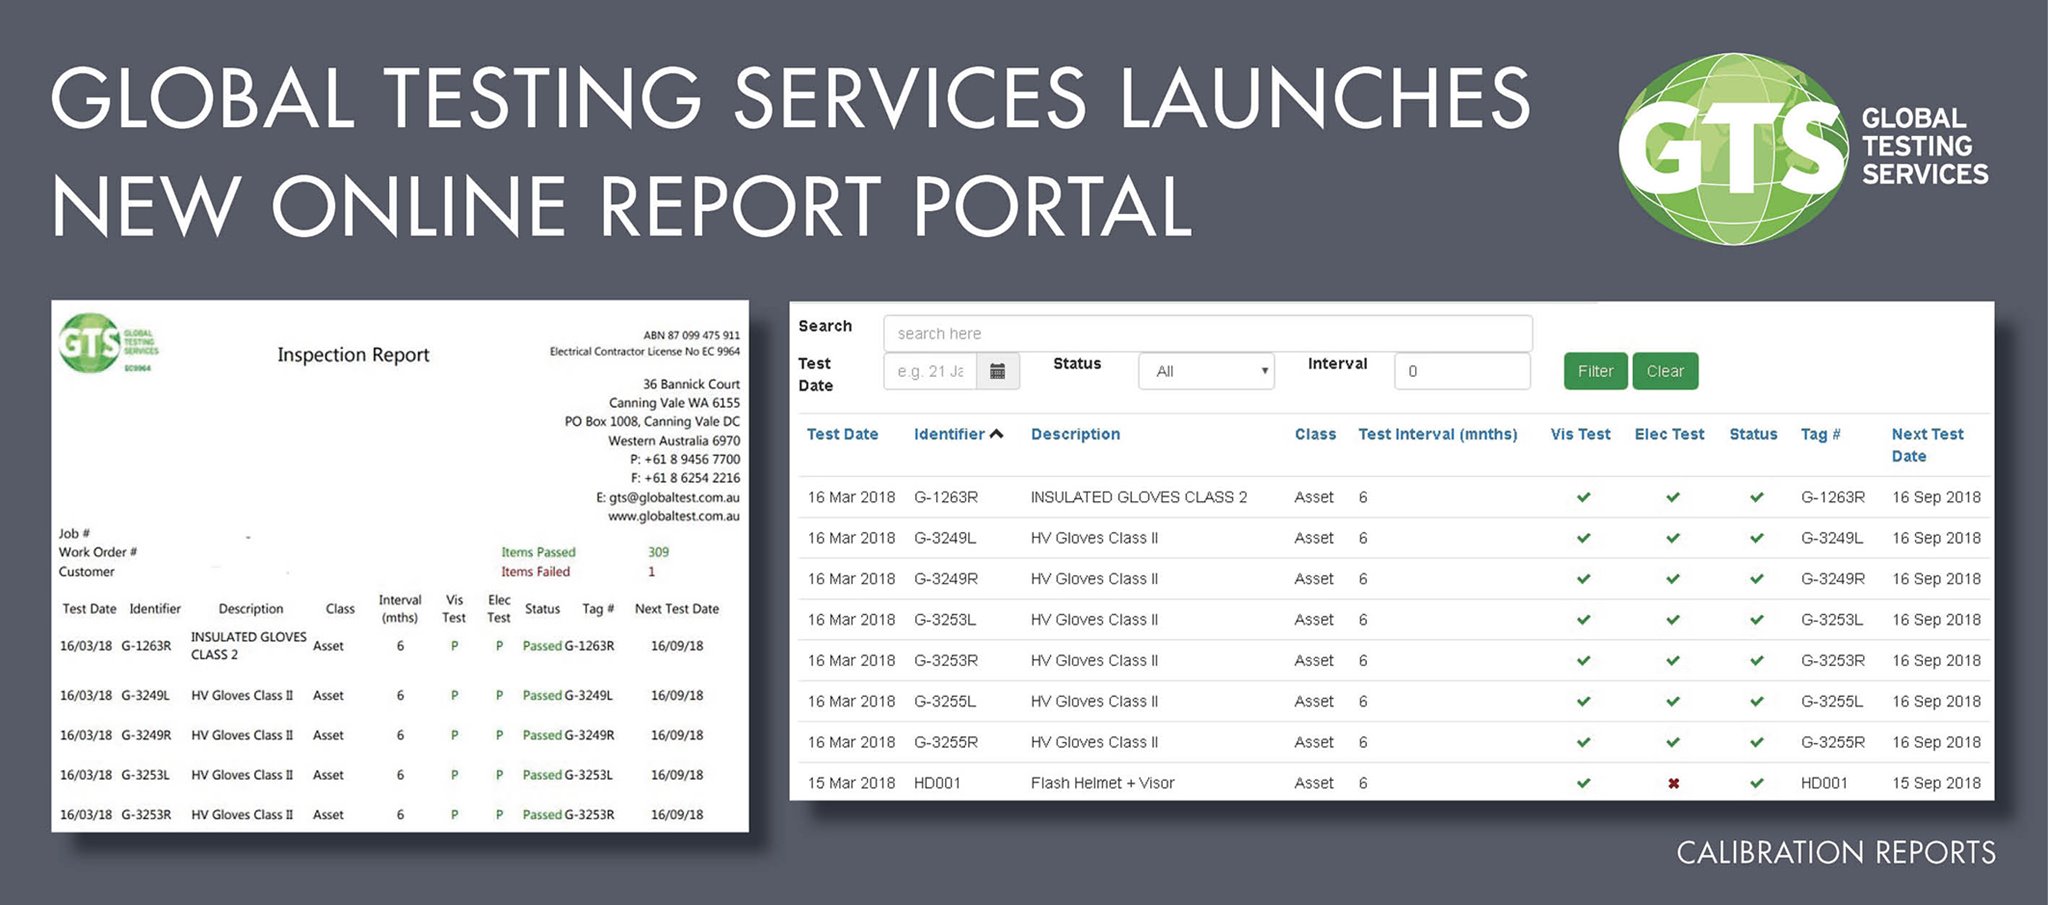 GTS launches new online report portal